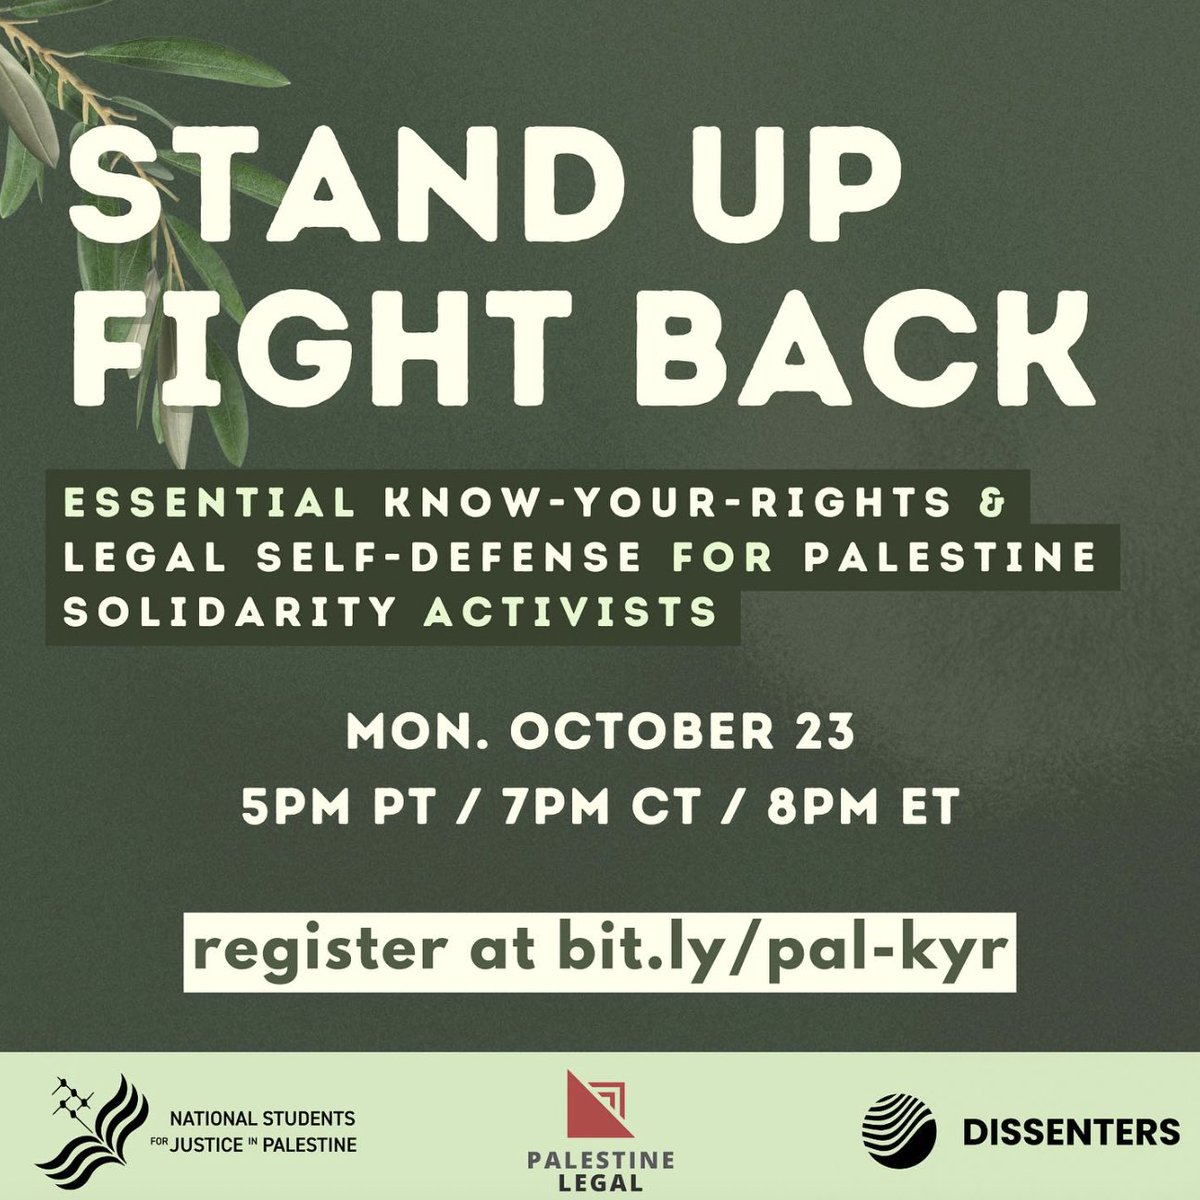 TONIGHT: Students are facing unprecedented repression and backlash from Zionist groups and administrators on our campuses. Join us alongside @wearedissenters and @NationalSJP for a Know Your Rights training @ 5PM PT / 7 PM CT / 8 PM ET. 🔗 Register at bit.ly/pal-kyr